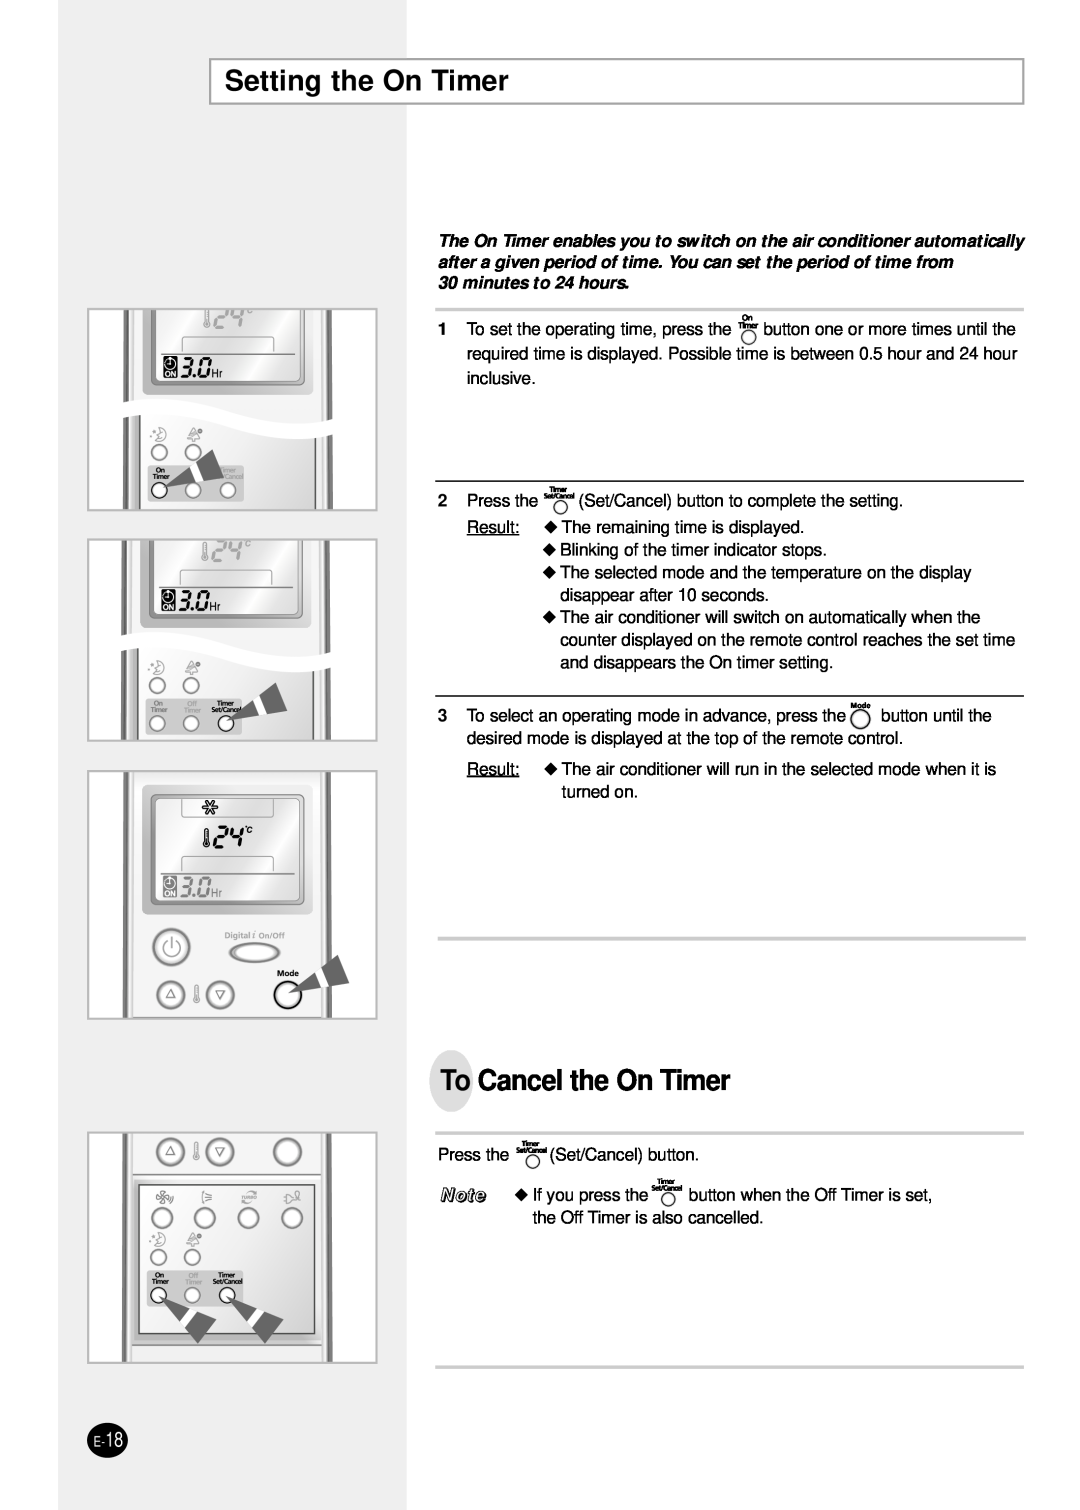 Samsung SH24TP6 manual Setting the On Timer, To Cancel the On Timer, minutes to 24 hours 